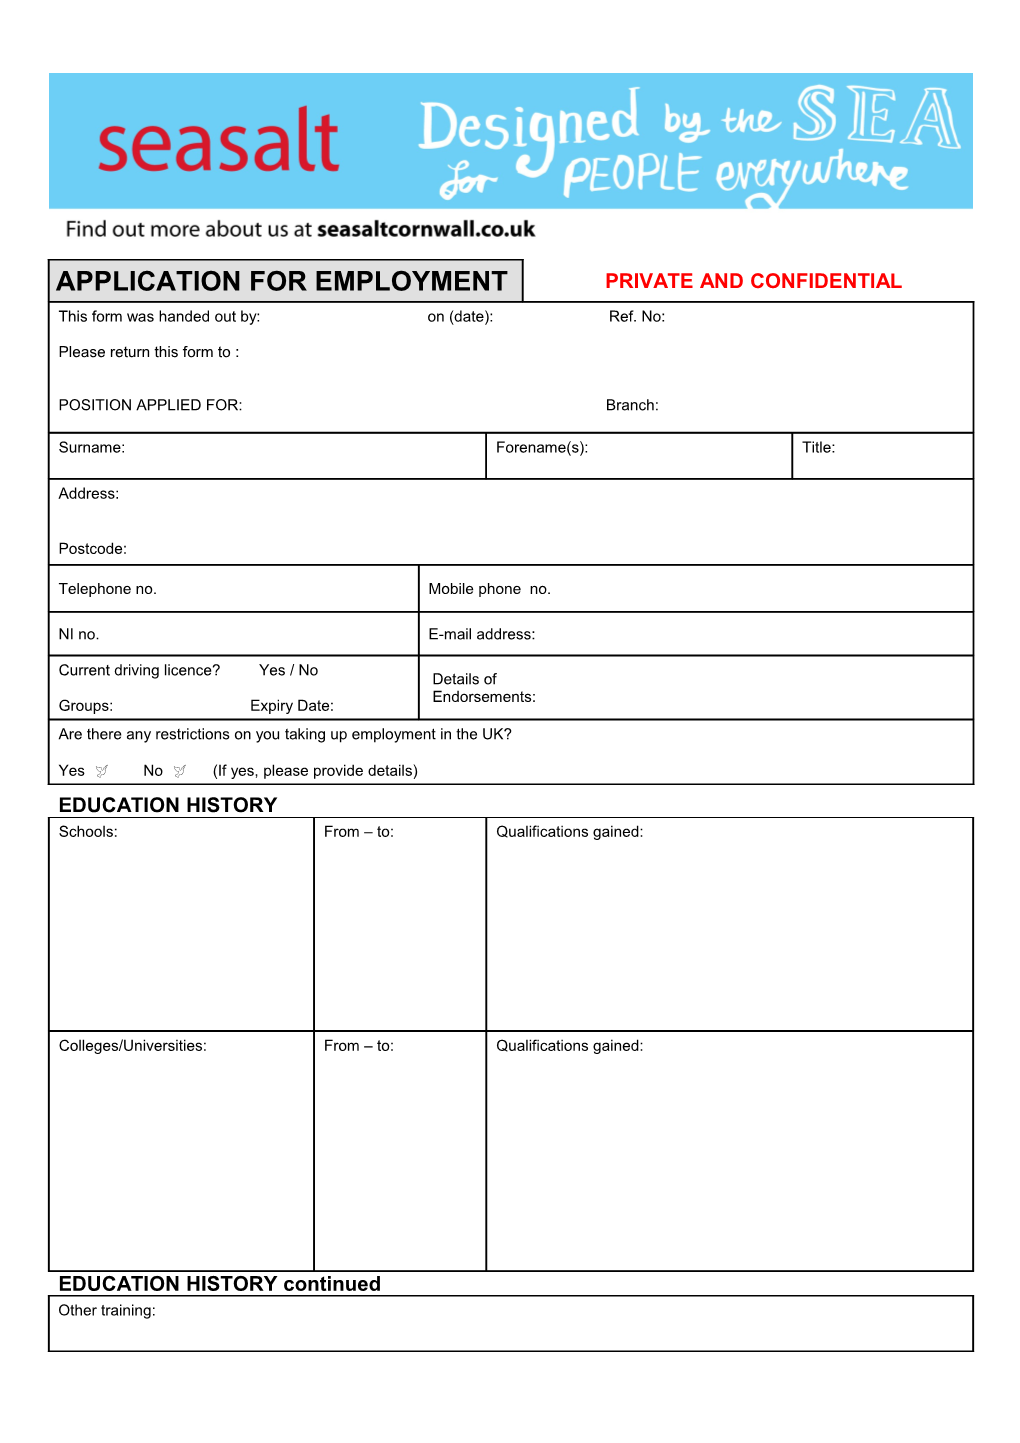 Application for Employment s114